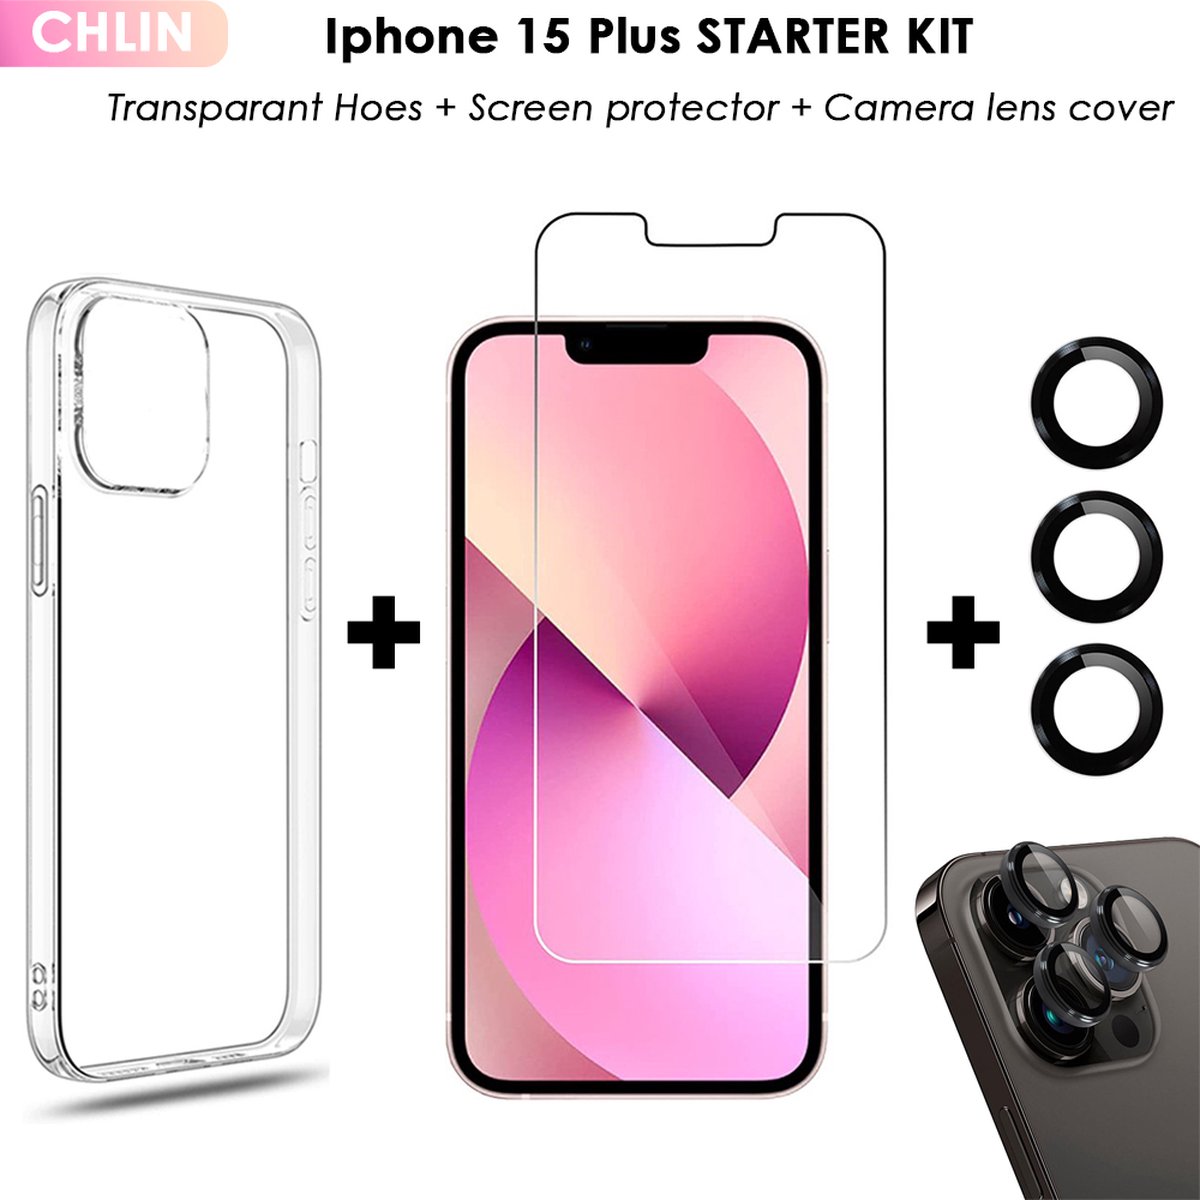 CL CHLIN® - Iphone 15 Plus Starter Kit (hoesje + screen protector + camera lens case) - Iphone 15 Plus screen protector - Iphone 15 Plus transprarant Hoesje - Iphone 15 Plus case - Iphone 15 Plus camera lens protector